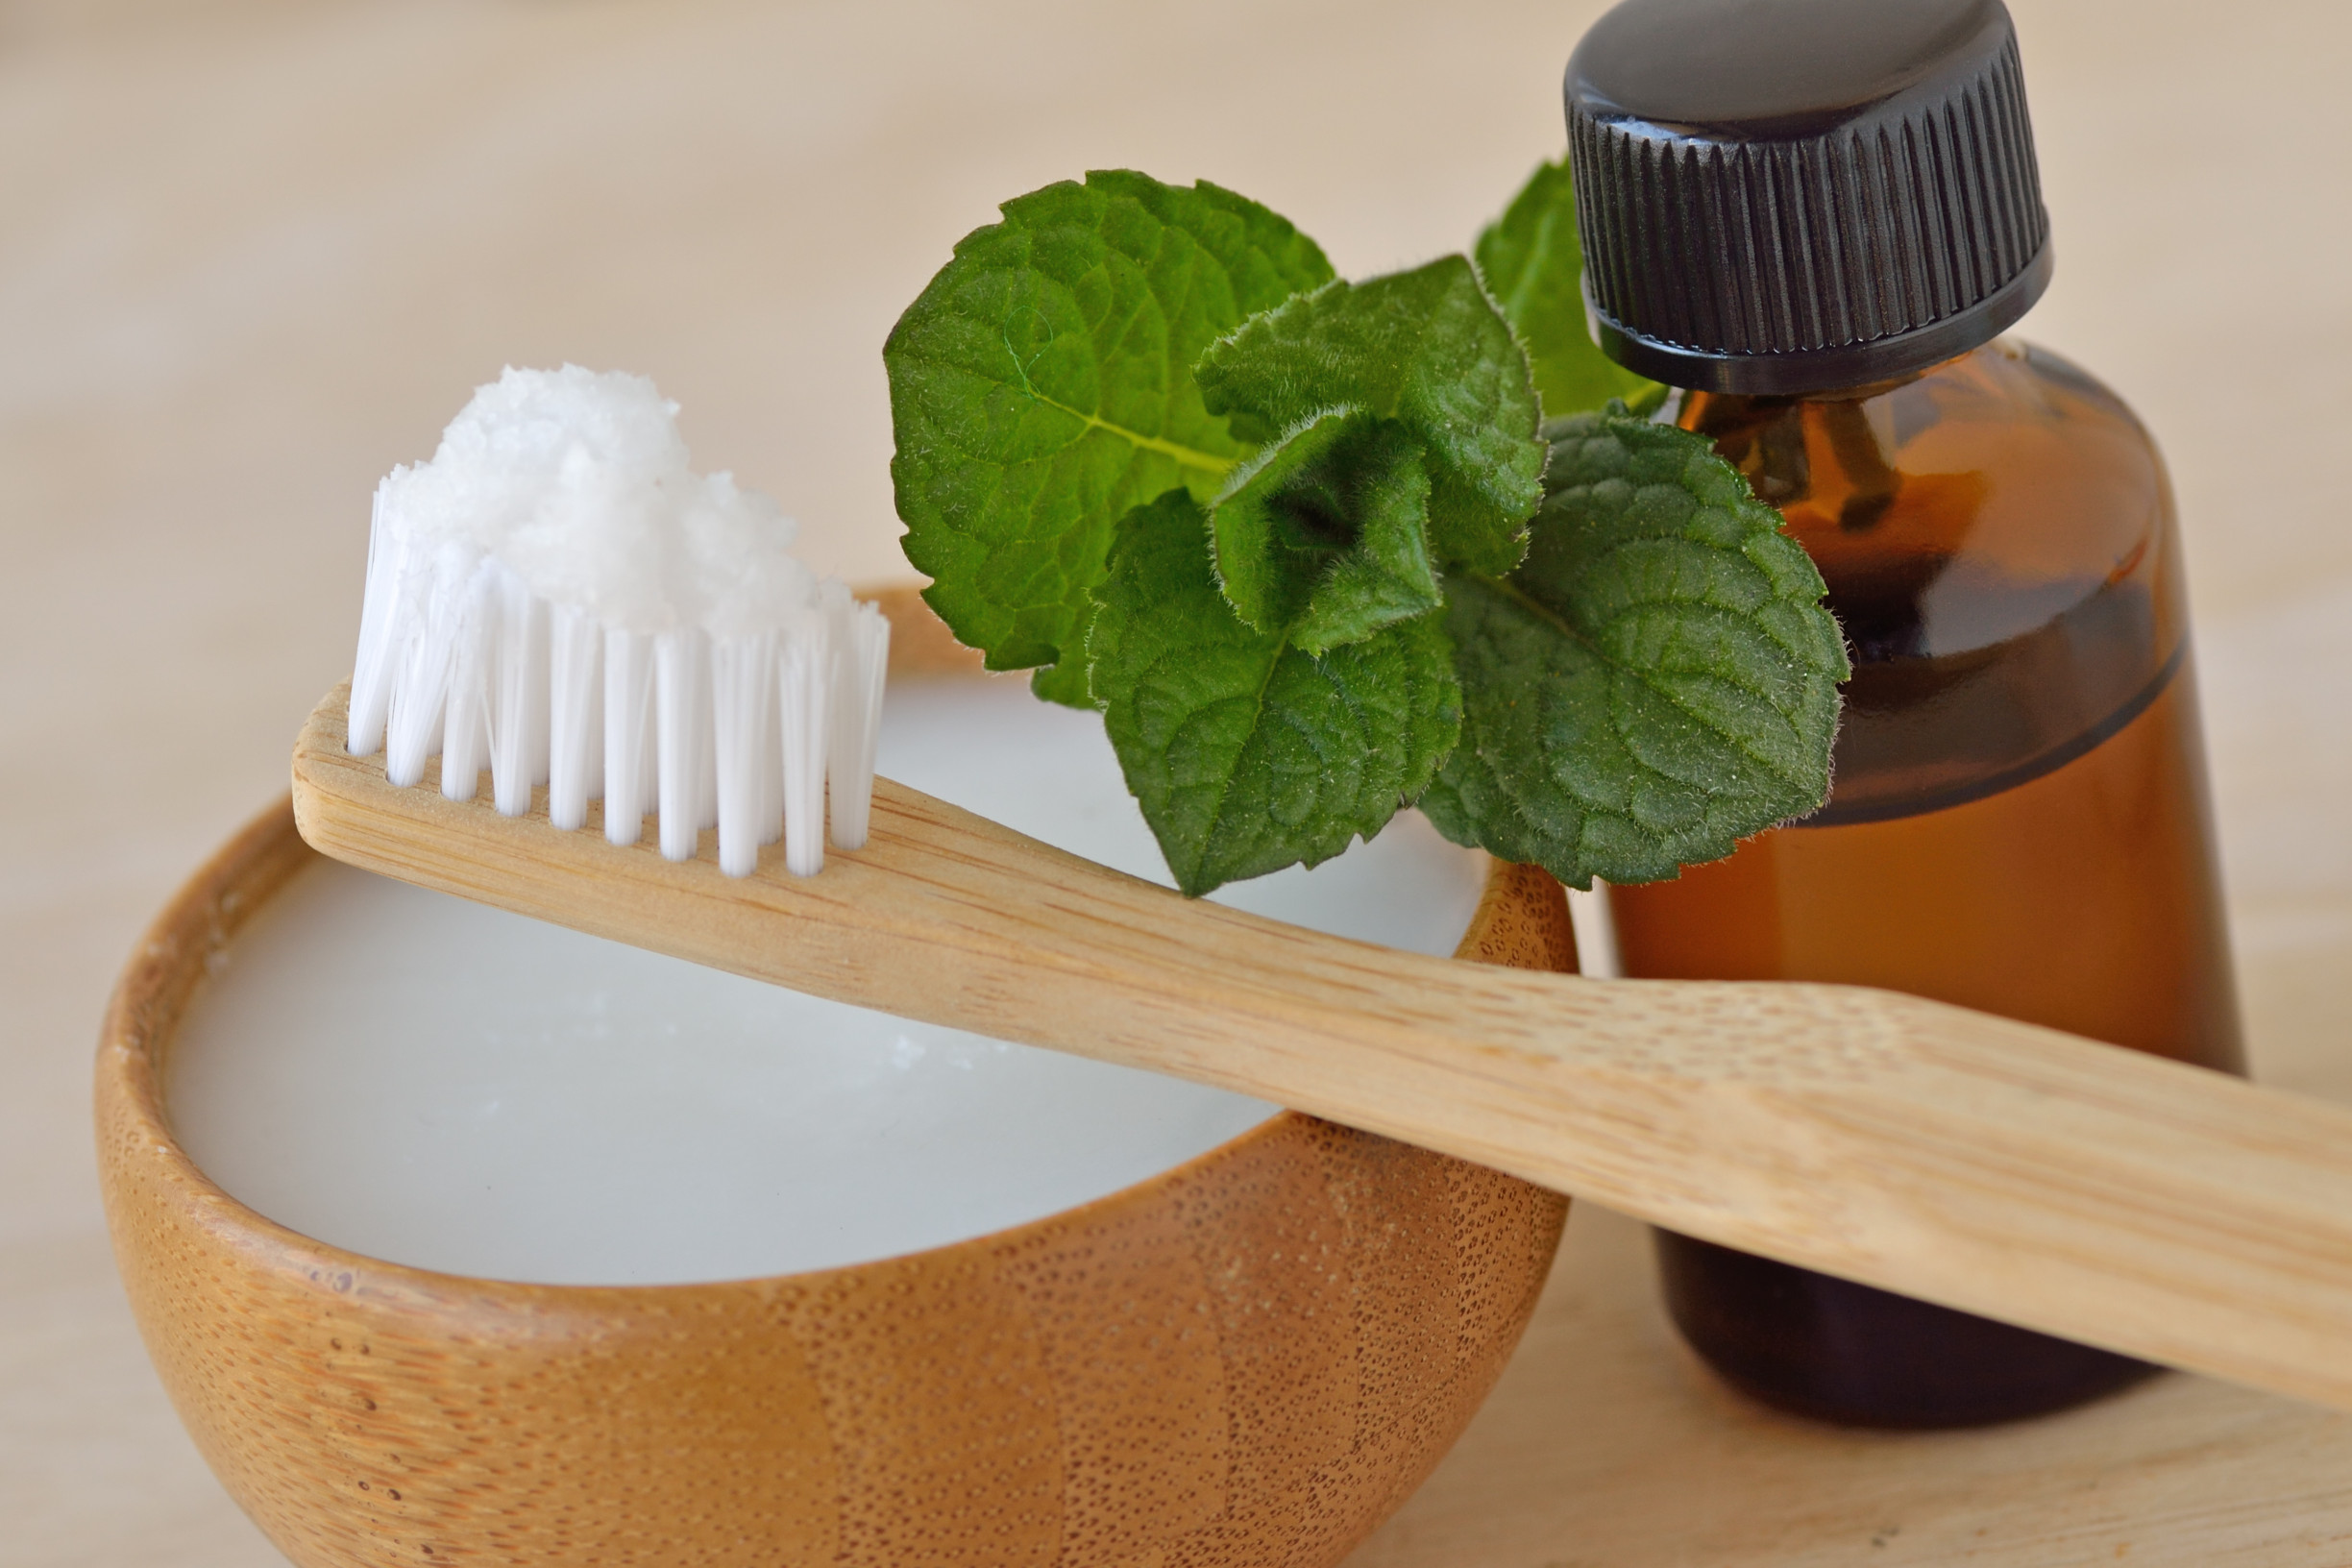 A Recipe to Make Your Own Homemade Toothpaste